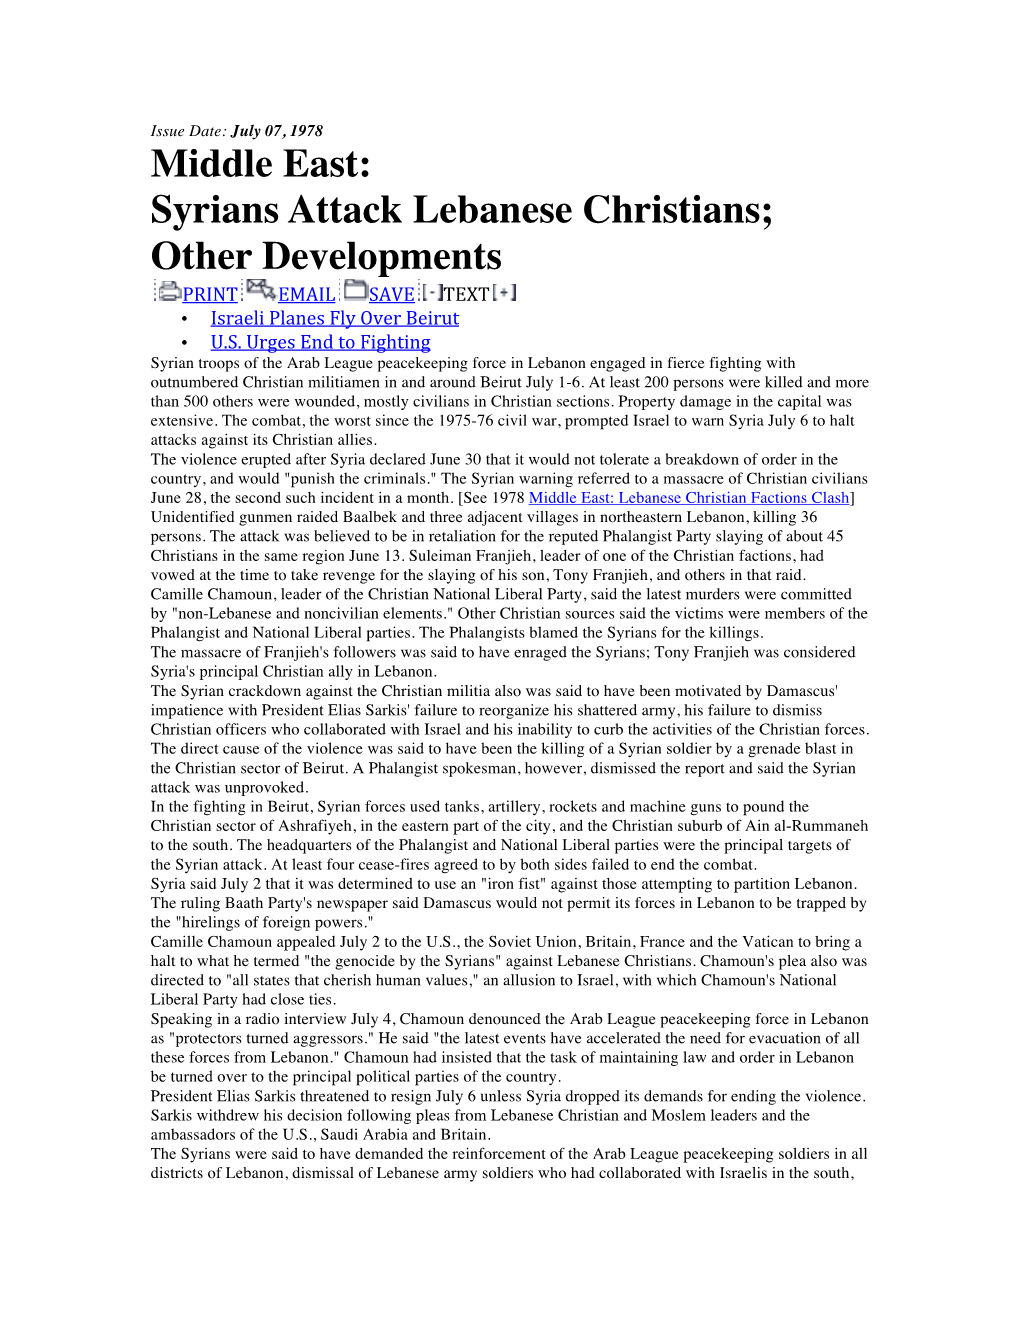 Middle East: Syrians Attack Lebanese Christians; Other Developments PRINT EMAIL SAVE TEXT • Israeli Planes Fly Over Beirut • U.S